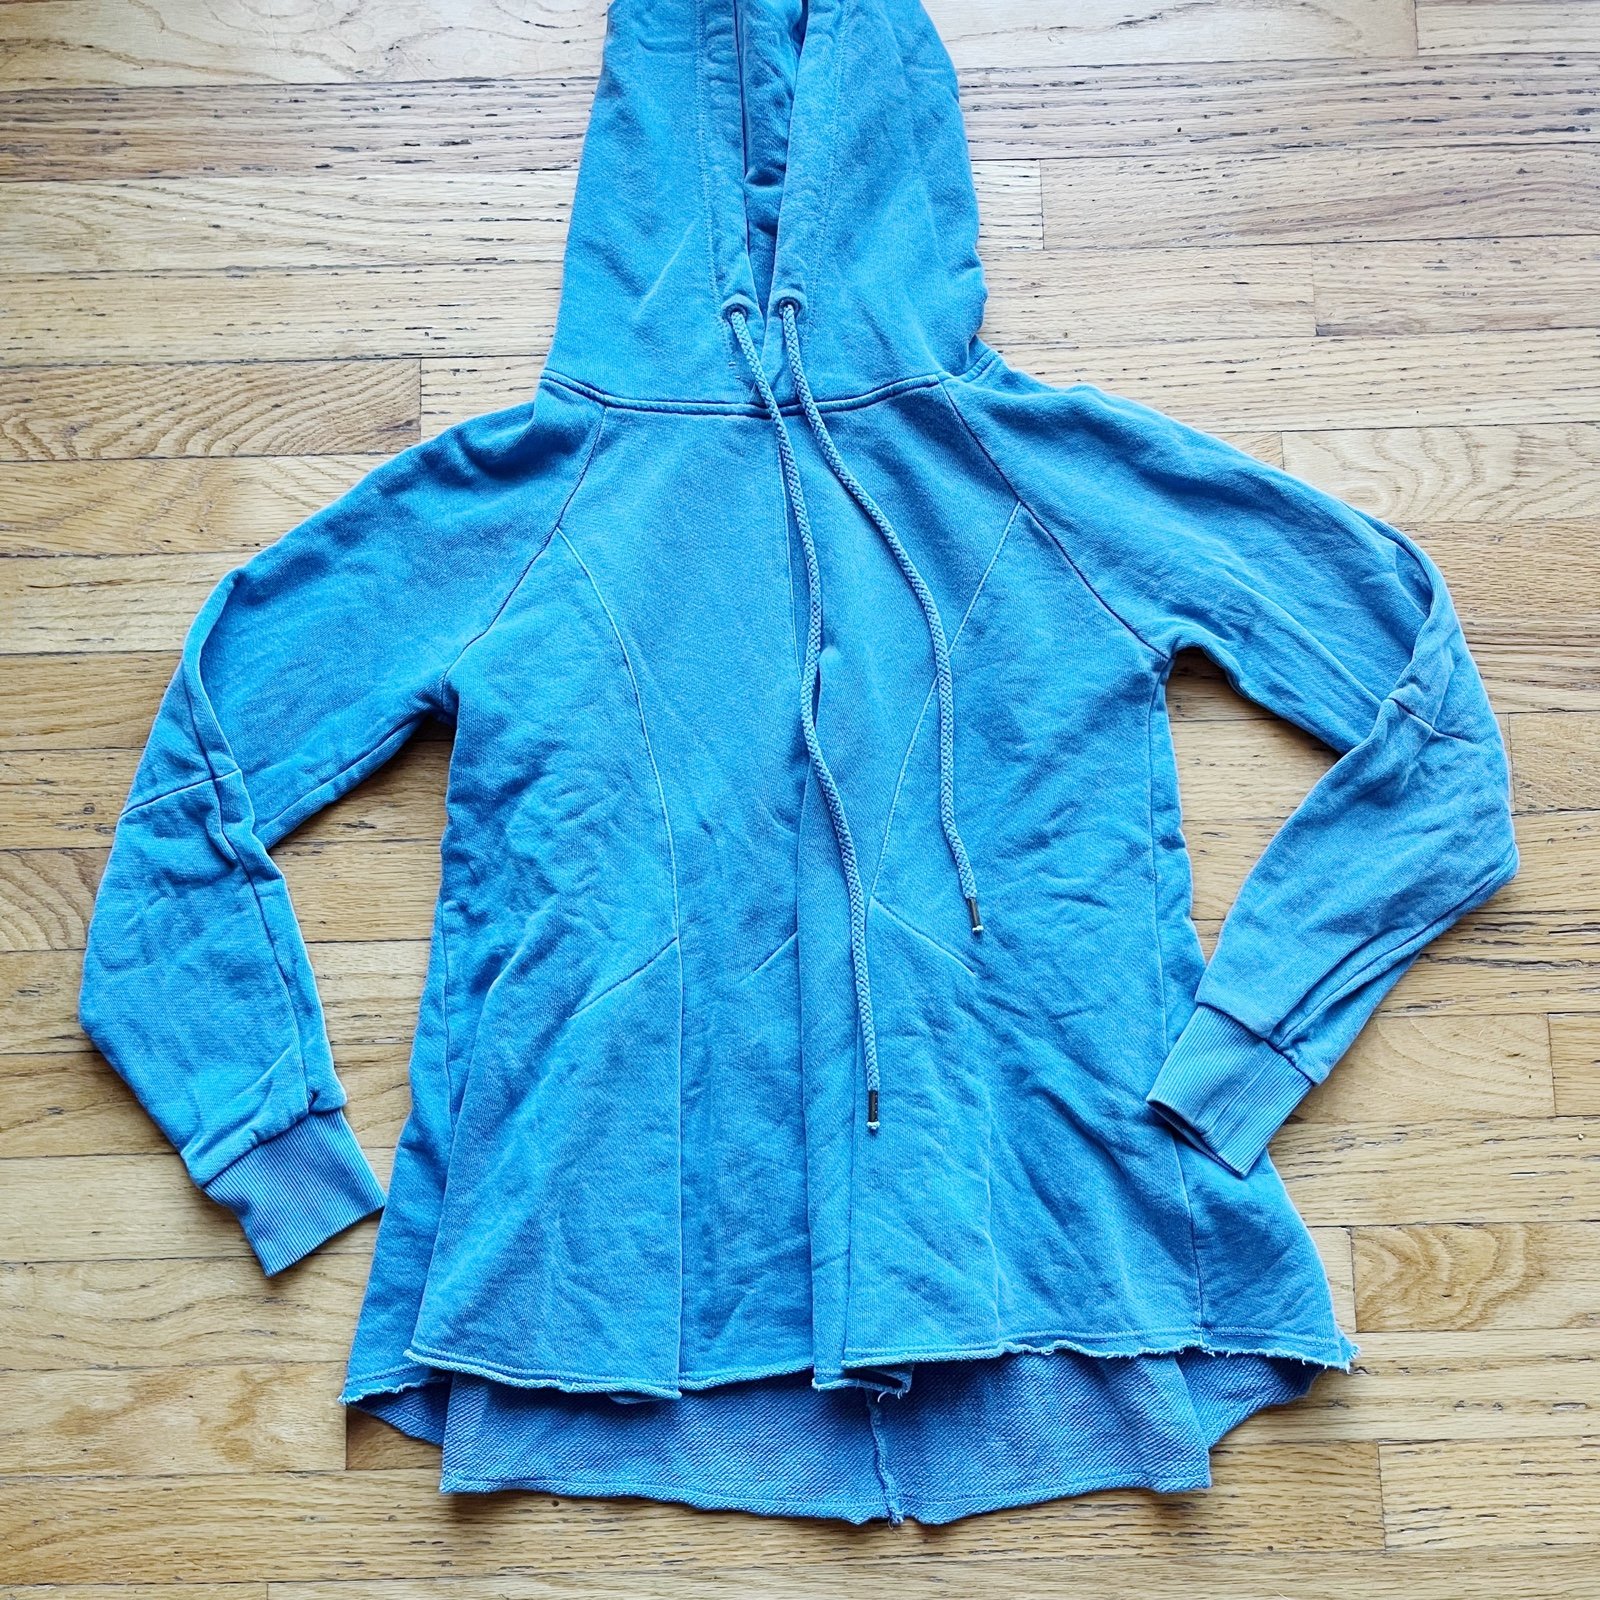 Latest  Anthropologie hoodie size xs oVRlD8r8H Counter 